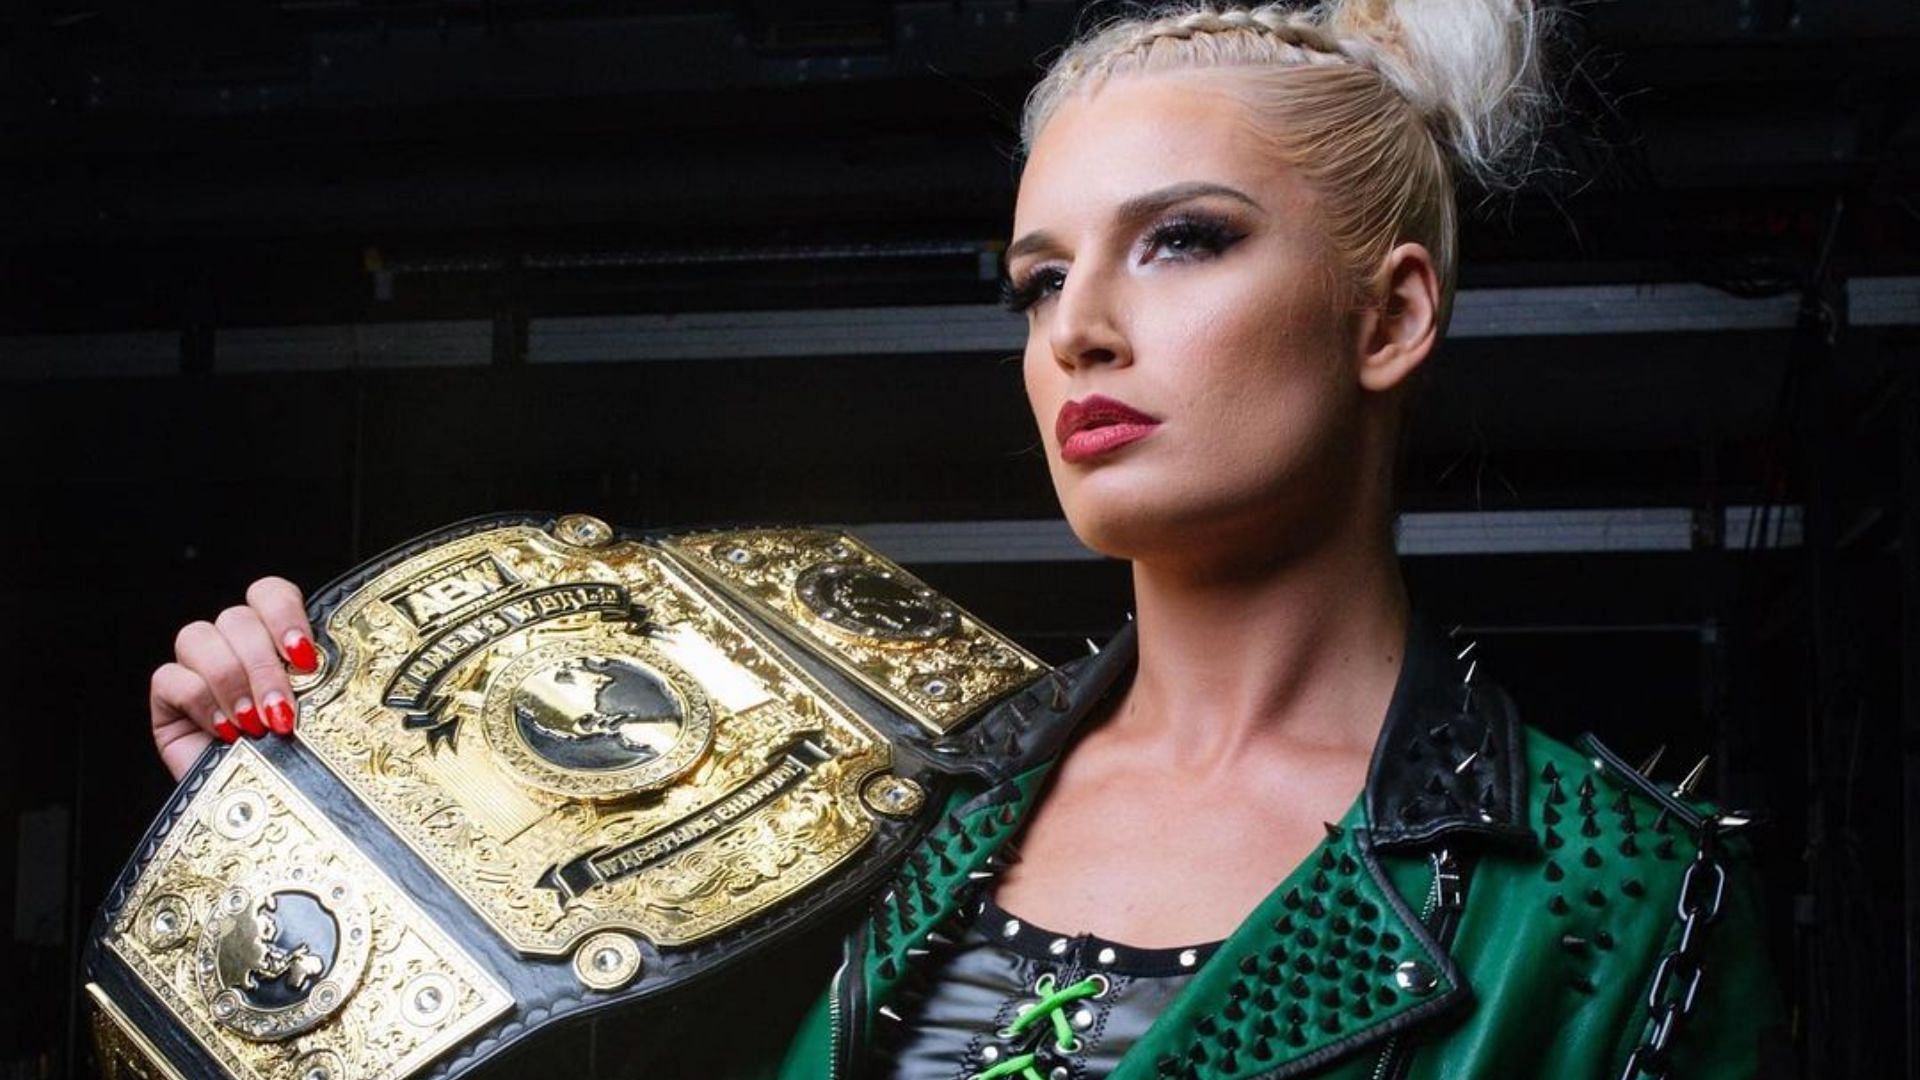 Will Toni Storm clash with this star despite her reservations?